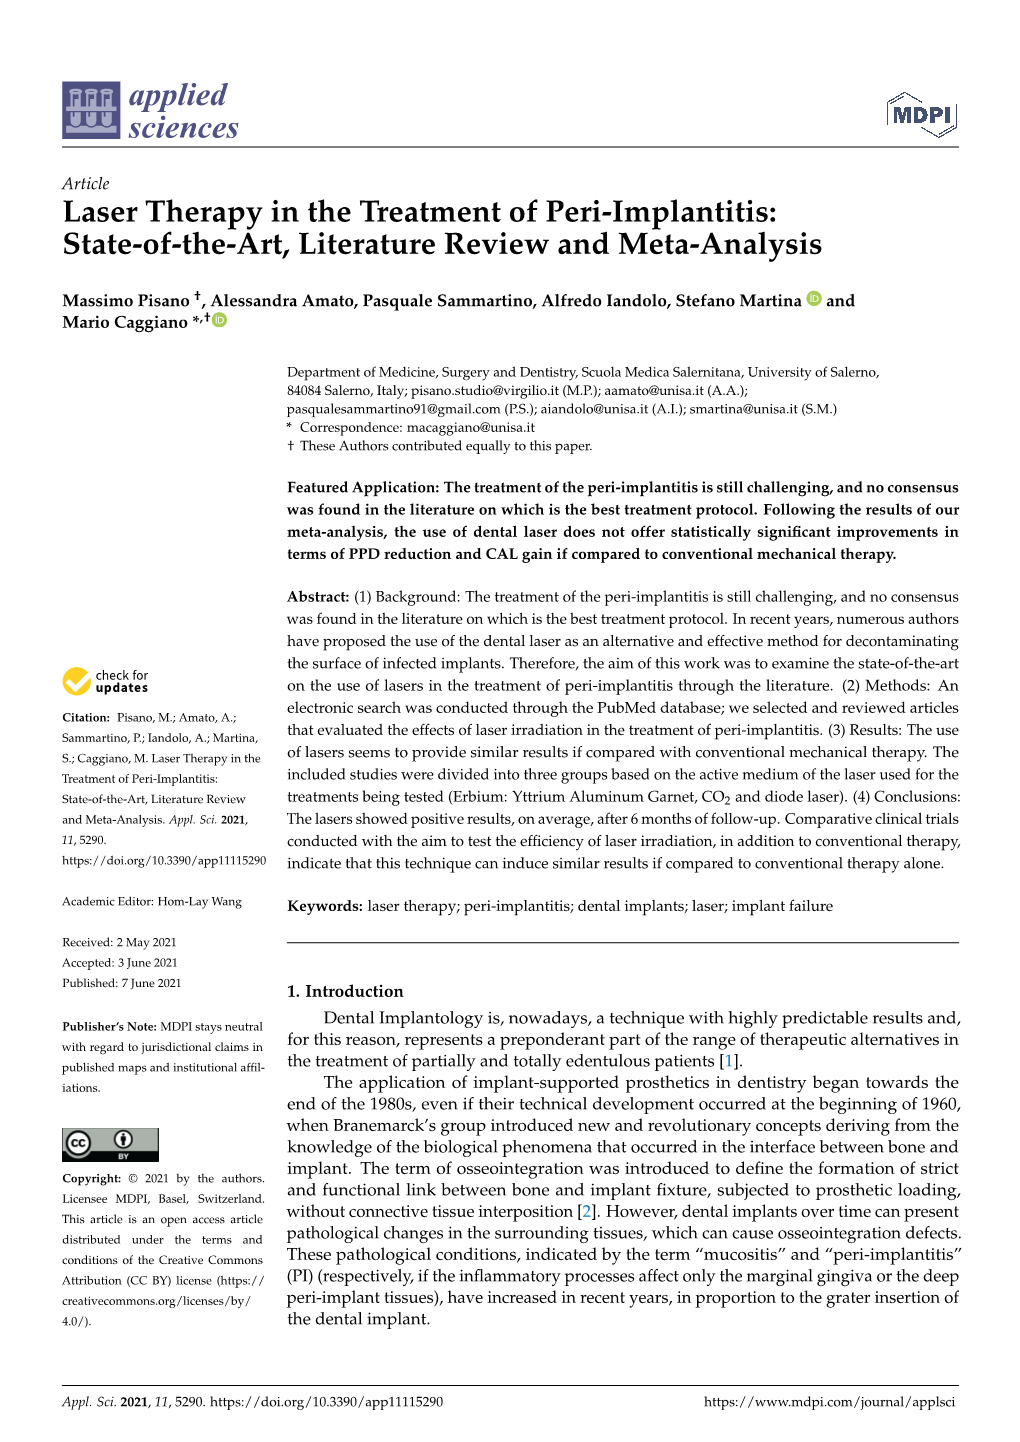 Laser Therapy in the Treatment of Peri-Implantitis: State-Of-The-Art, Literature Review and Meta-Analysis